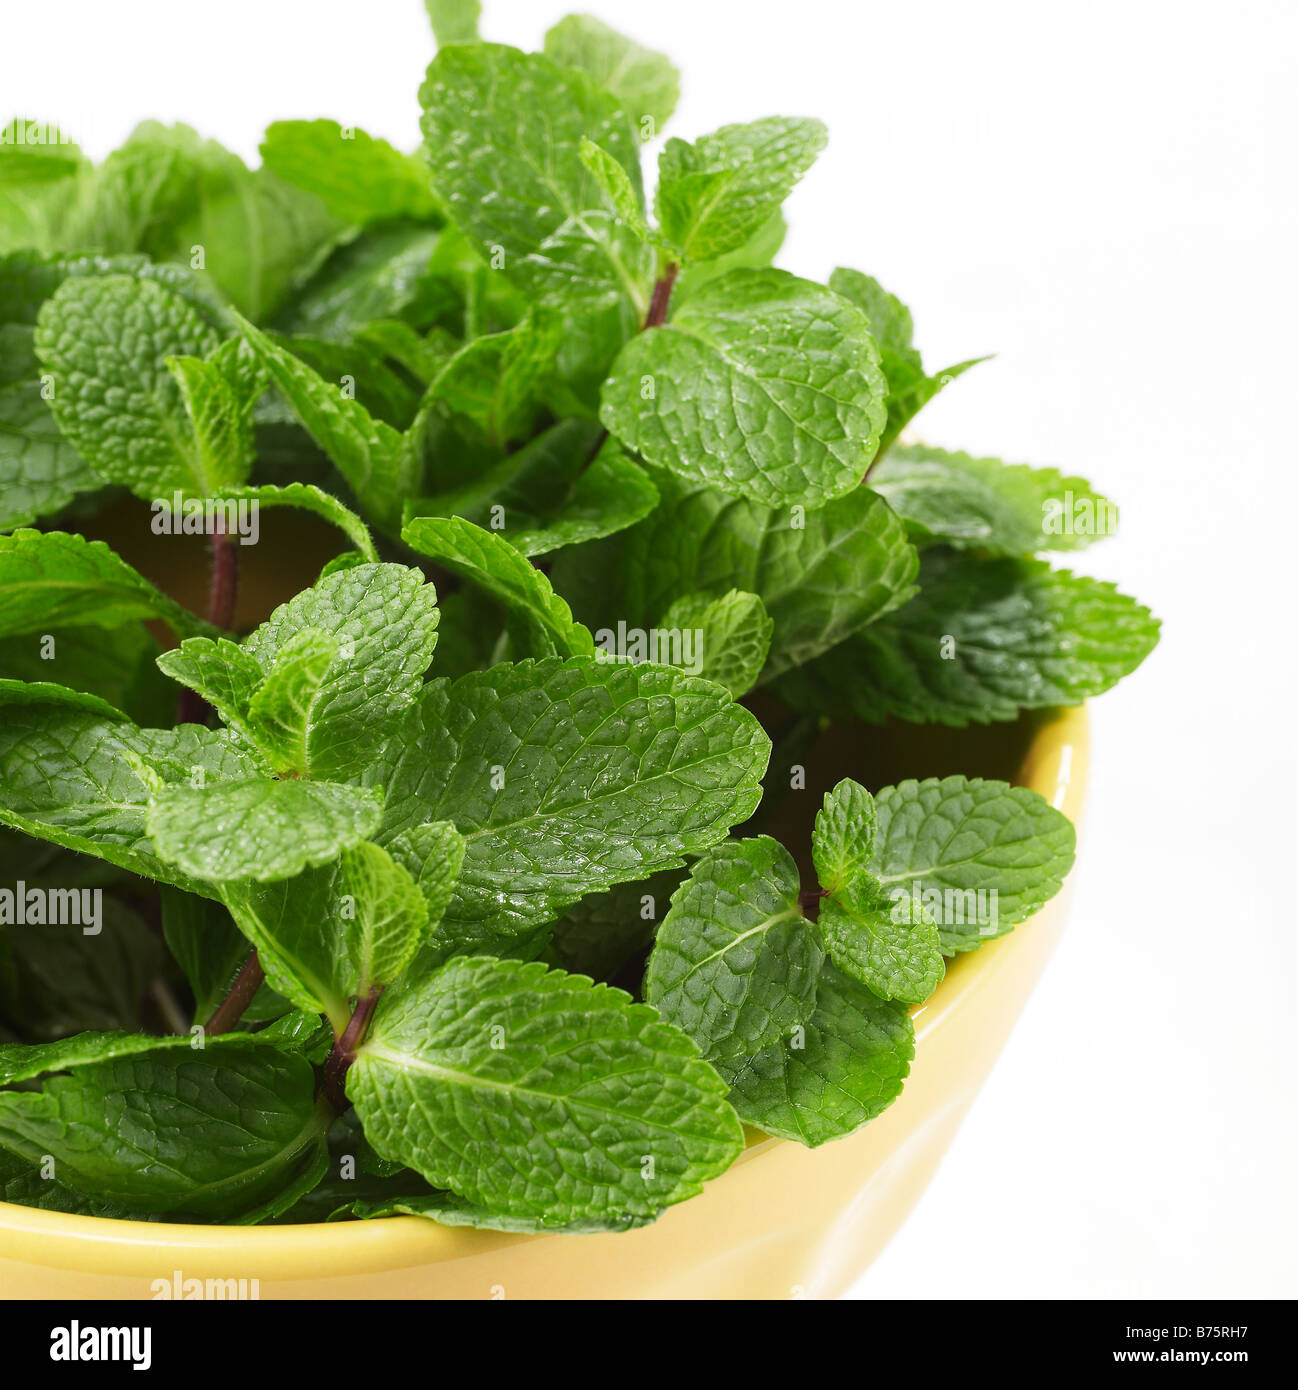 Mint leaves in a yellow bowl on a white background Stock Photo